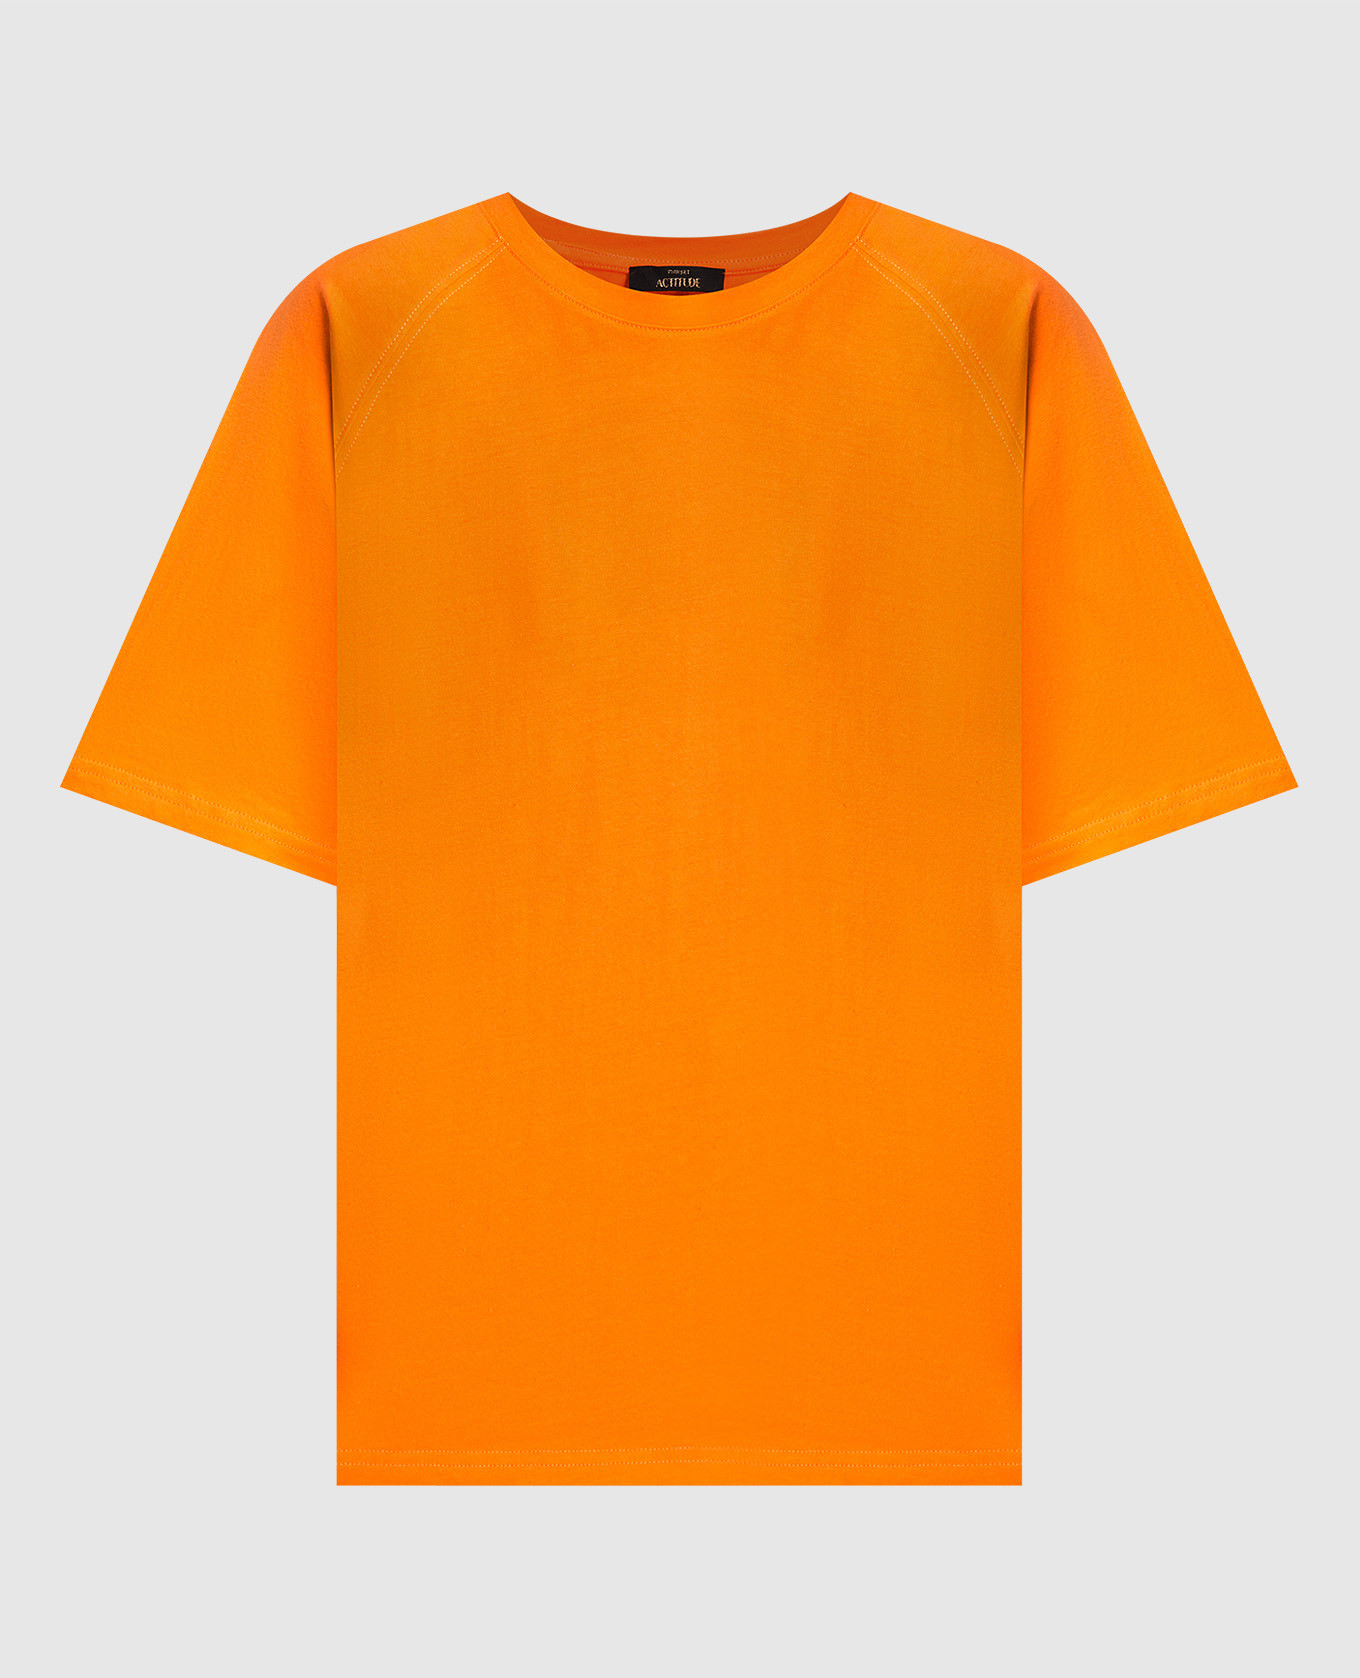 Orange t-shirt with crystals